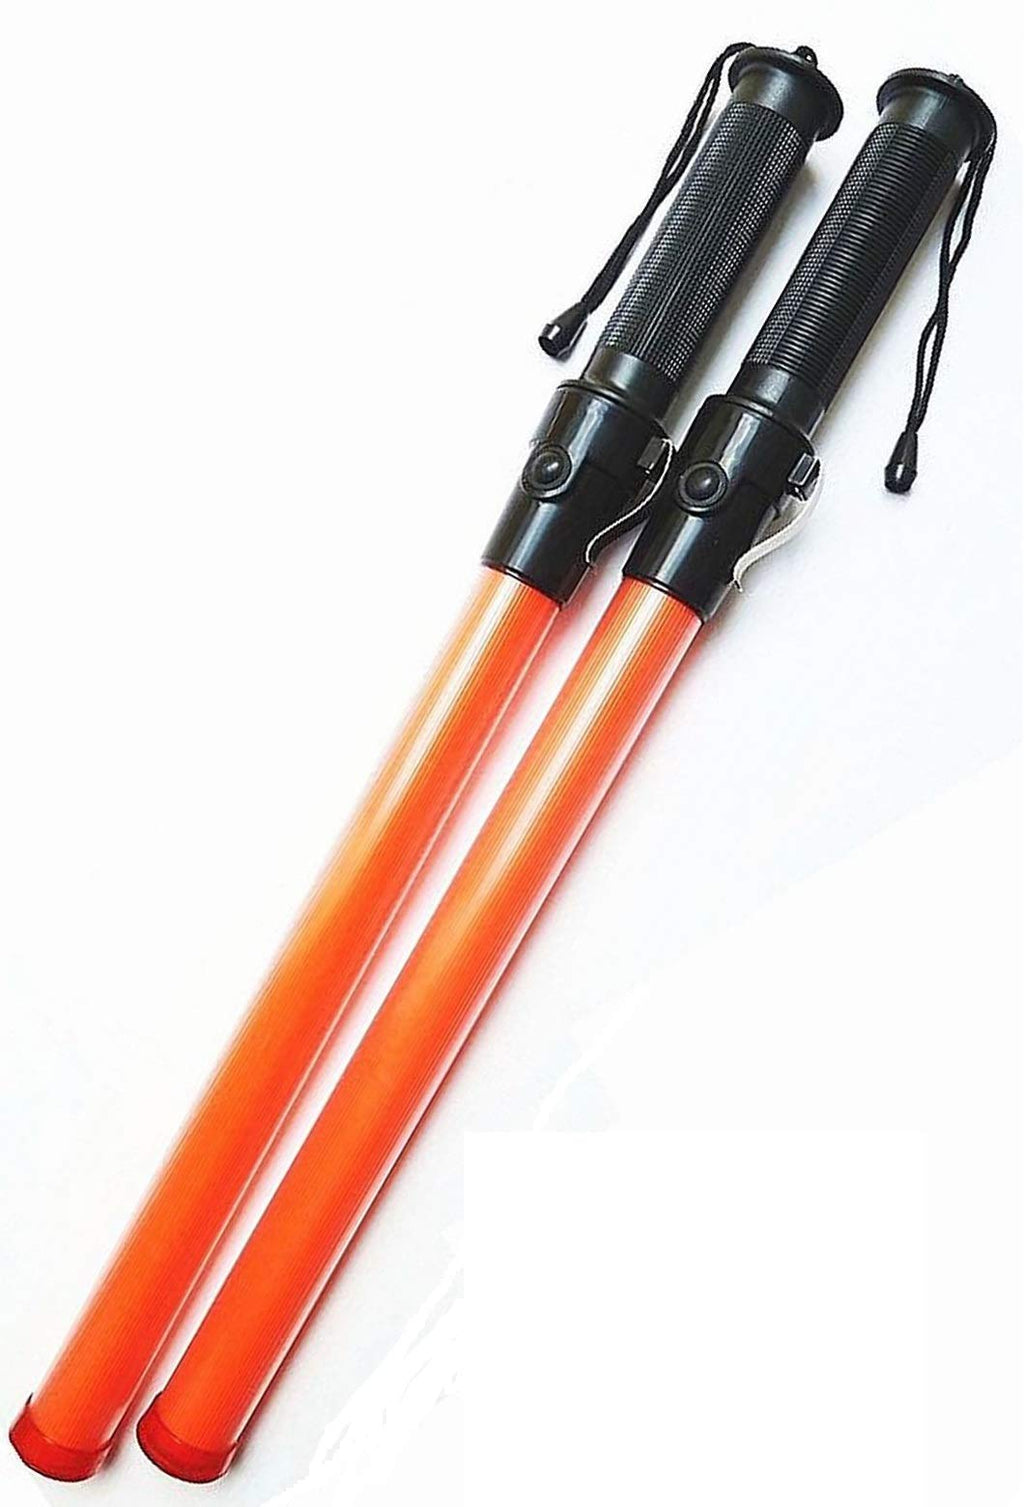  [AUSTRALIA] - Lot of Two (2) pieces: 12 Red LED Traffic Safety Baton Light, with two flashing modes, 20.5 inch length, using 2 C-size batteries (Not included)